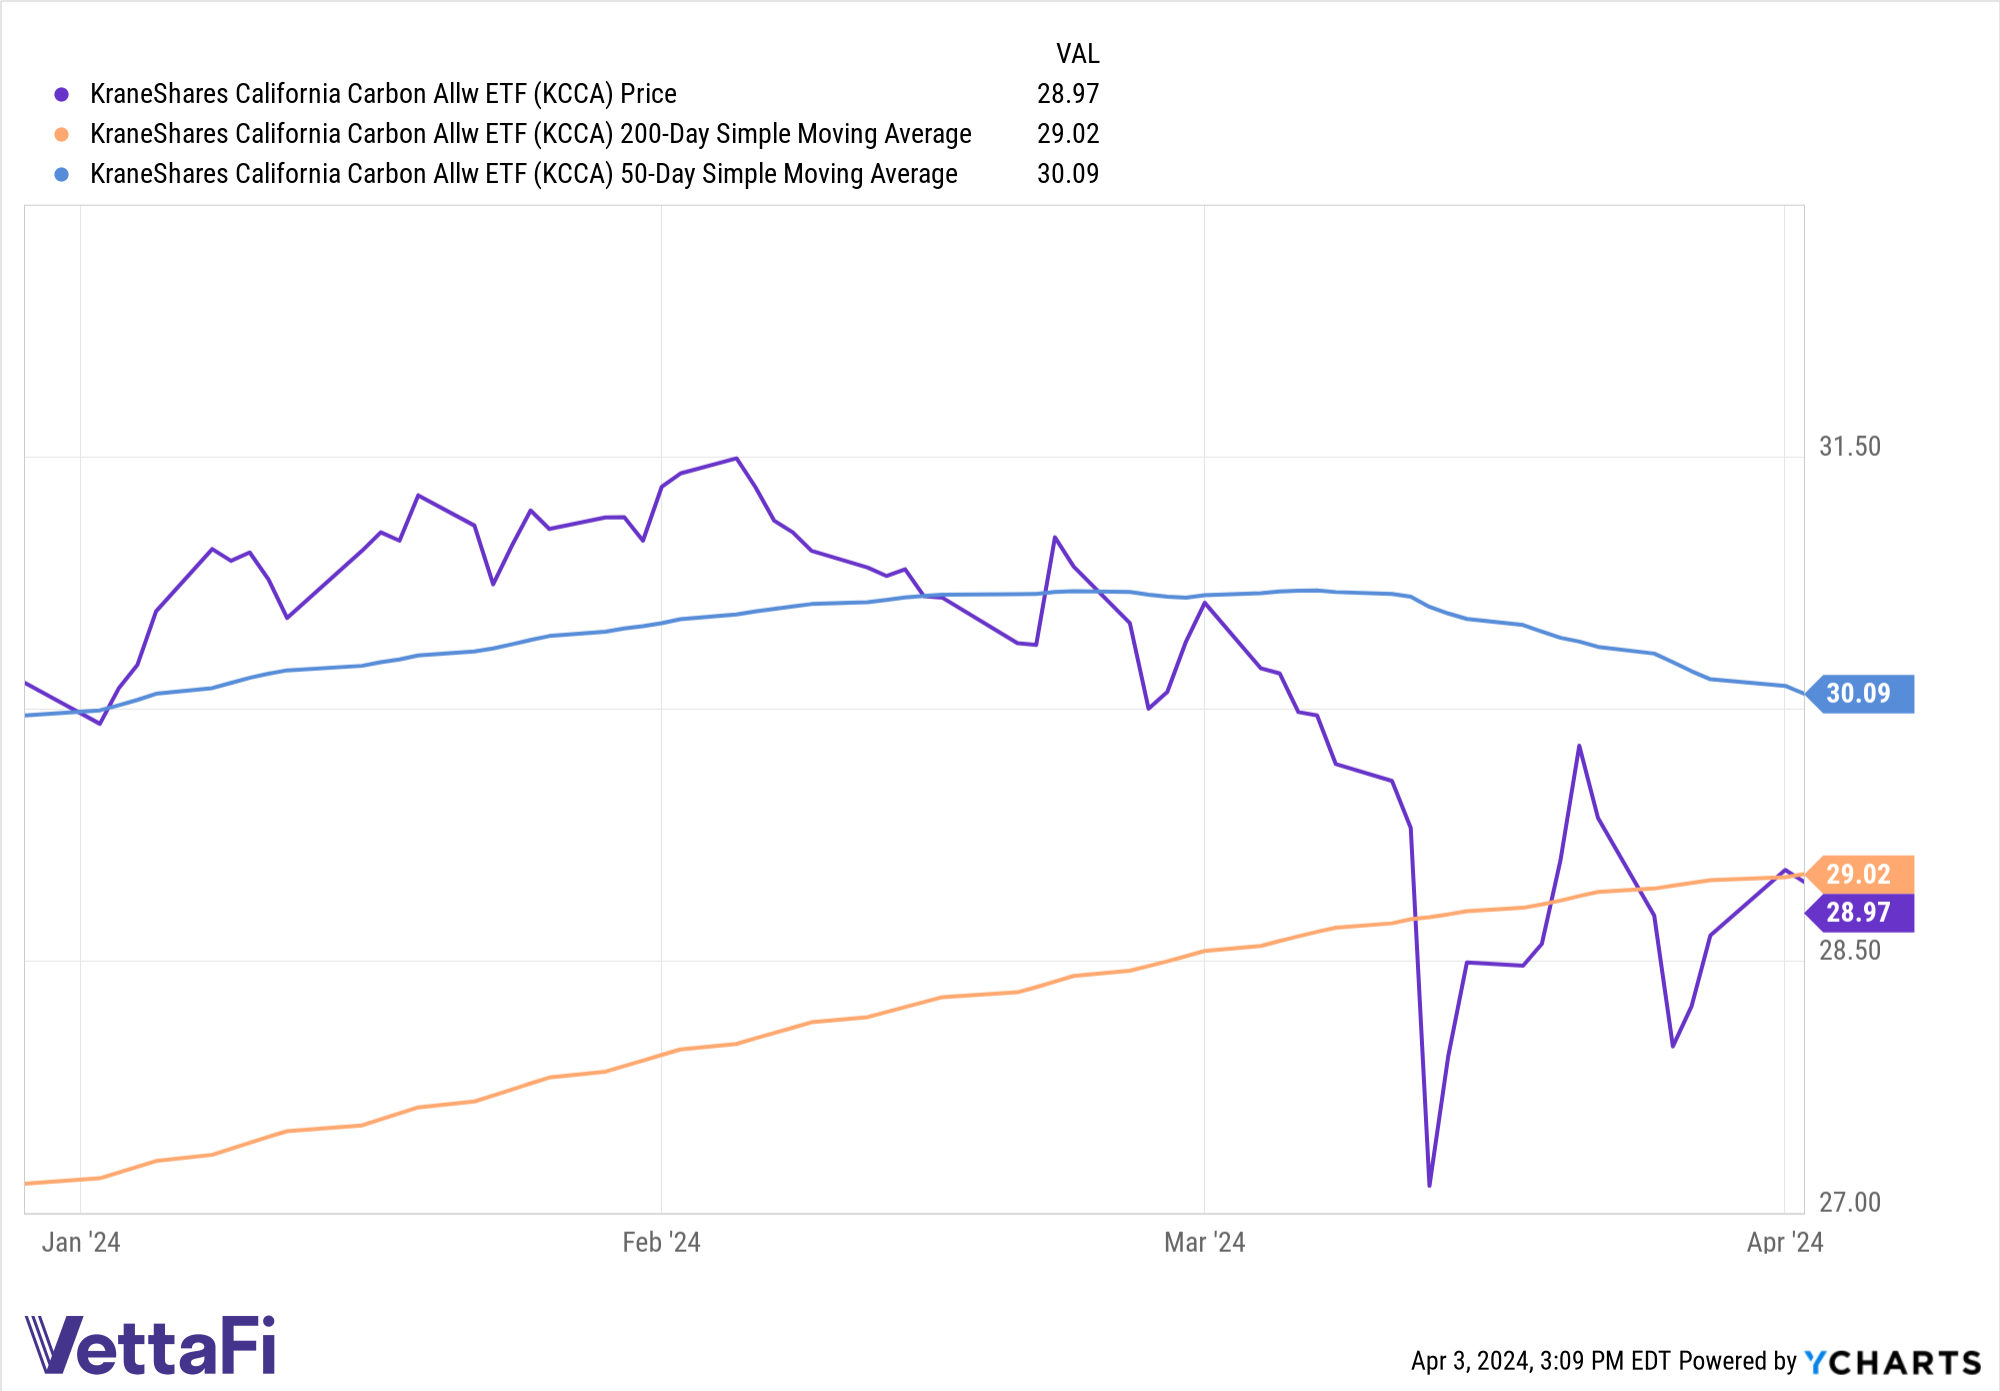 Price of KCCA YTD alongside the fund's 50-day and 200-day SMA.